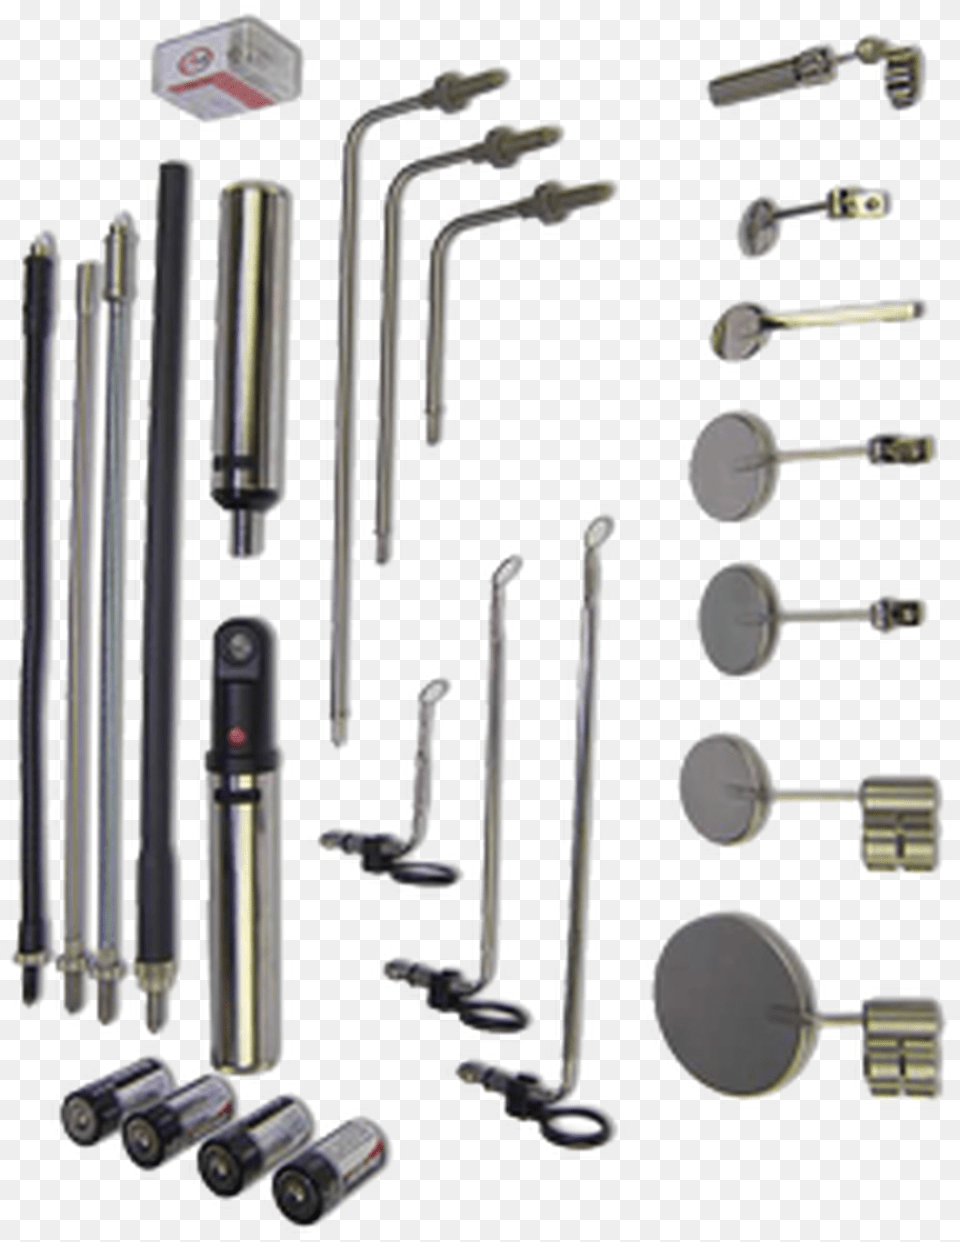 Eod Endoscope Amp Mirror Kit Tools Used In Endoscopy, Smoke Pipe Png Image